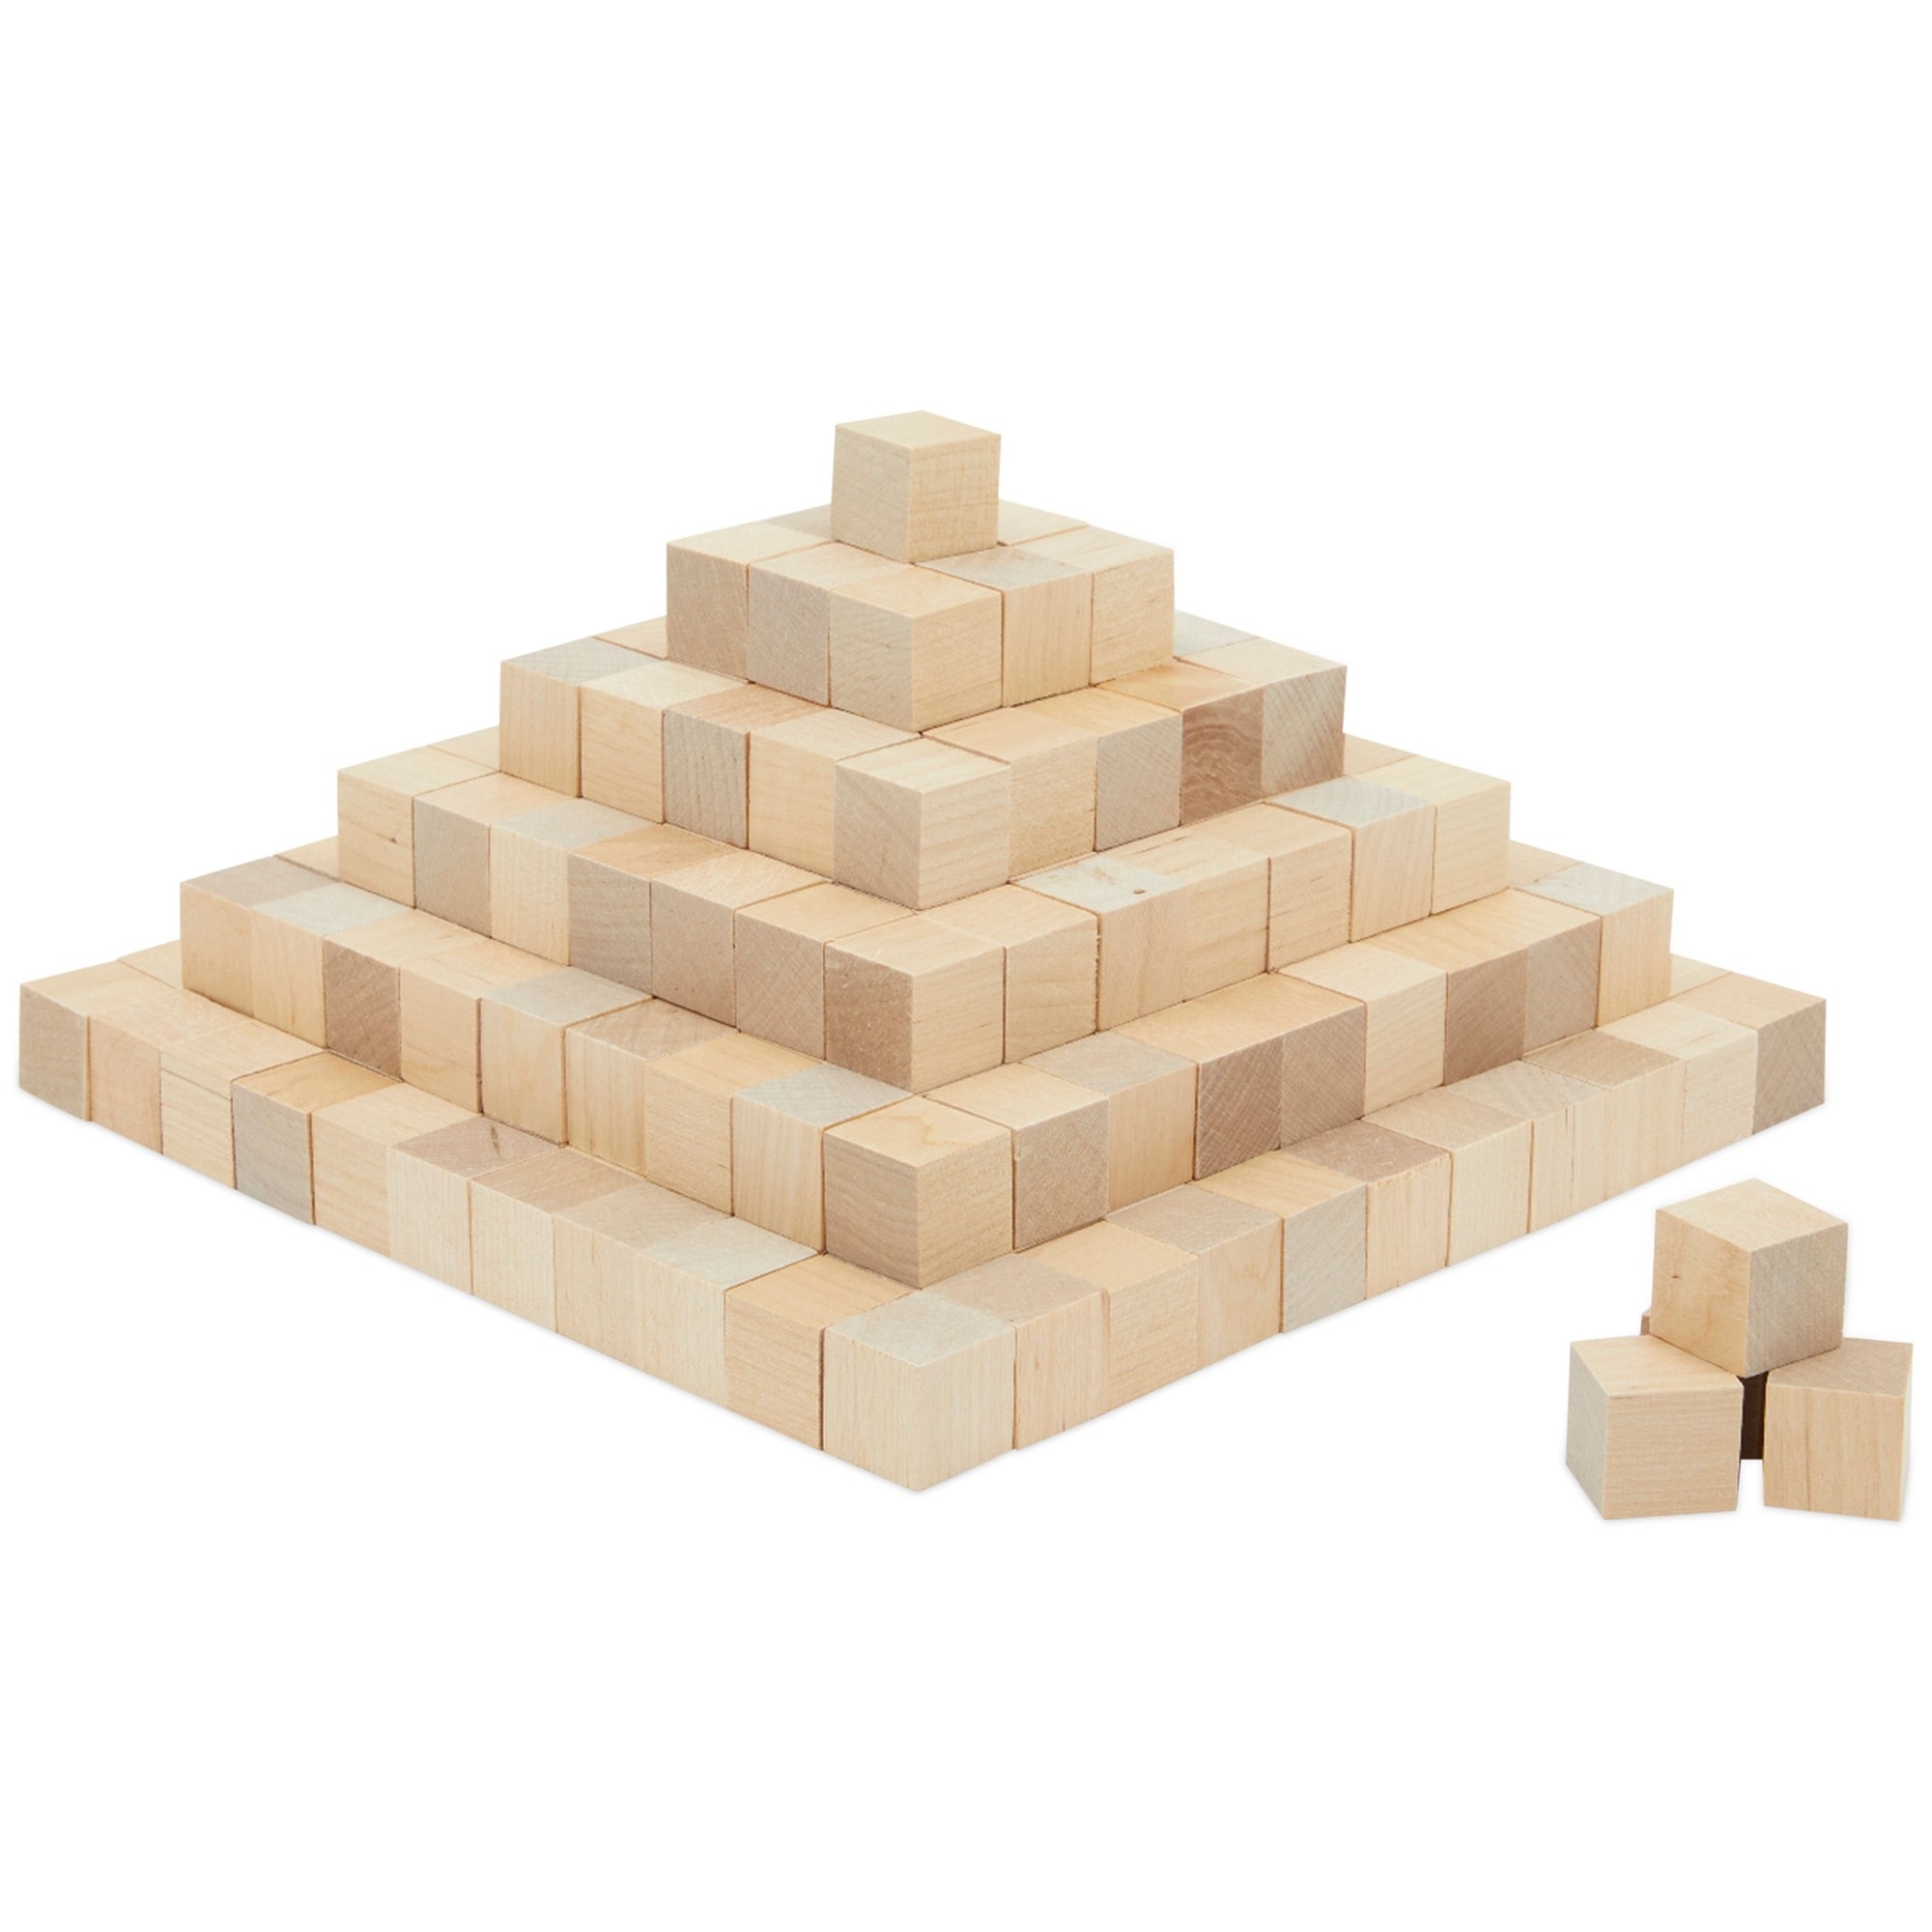  Wood Blocks for Crafts, 1.5 inch Unfinished Wood Cubes, 15 Pcs  Natural Wooden Blocks, Wood Square Blocks, Wooden Cubes for Arts and DIY  Projects, Puzzle Making